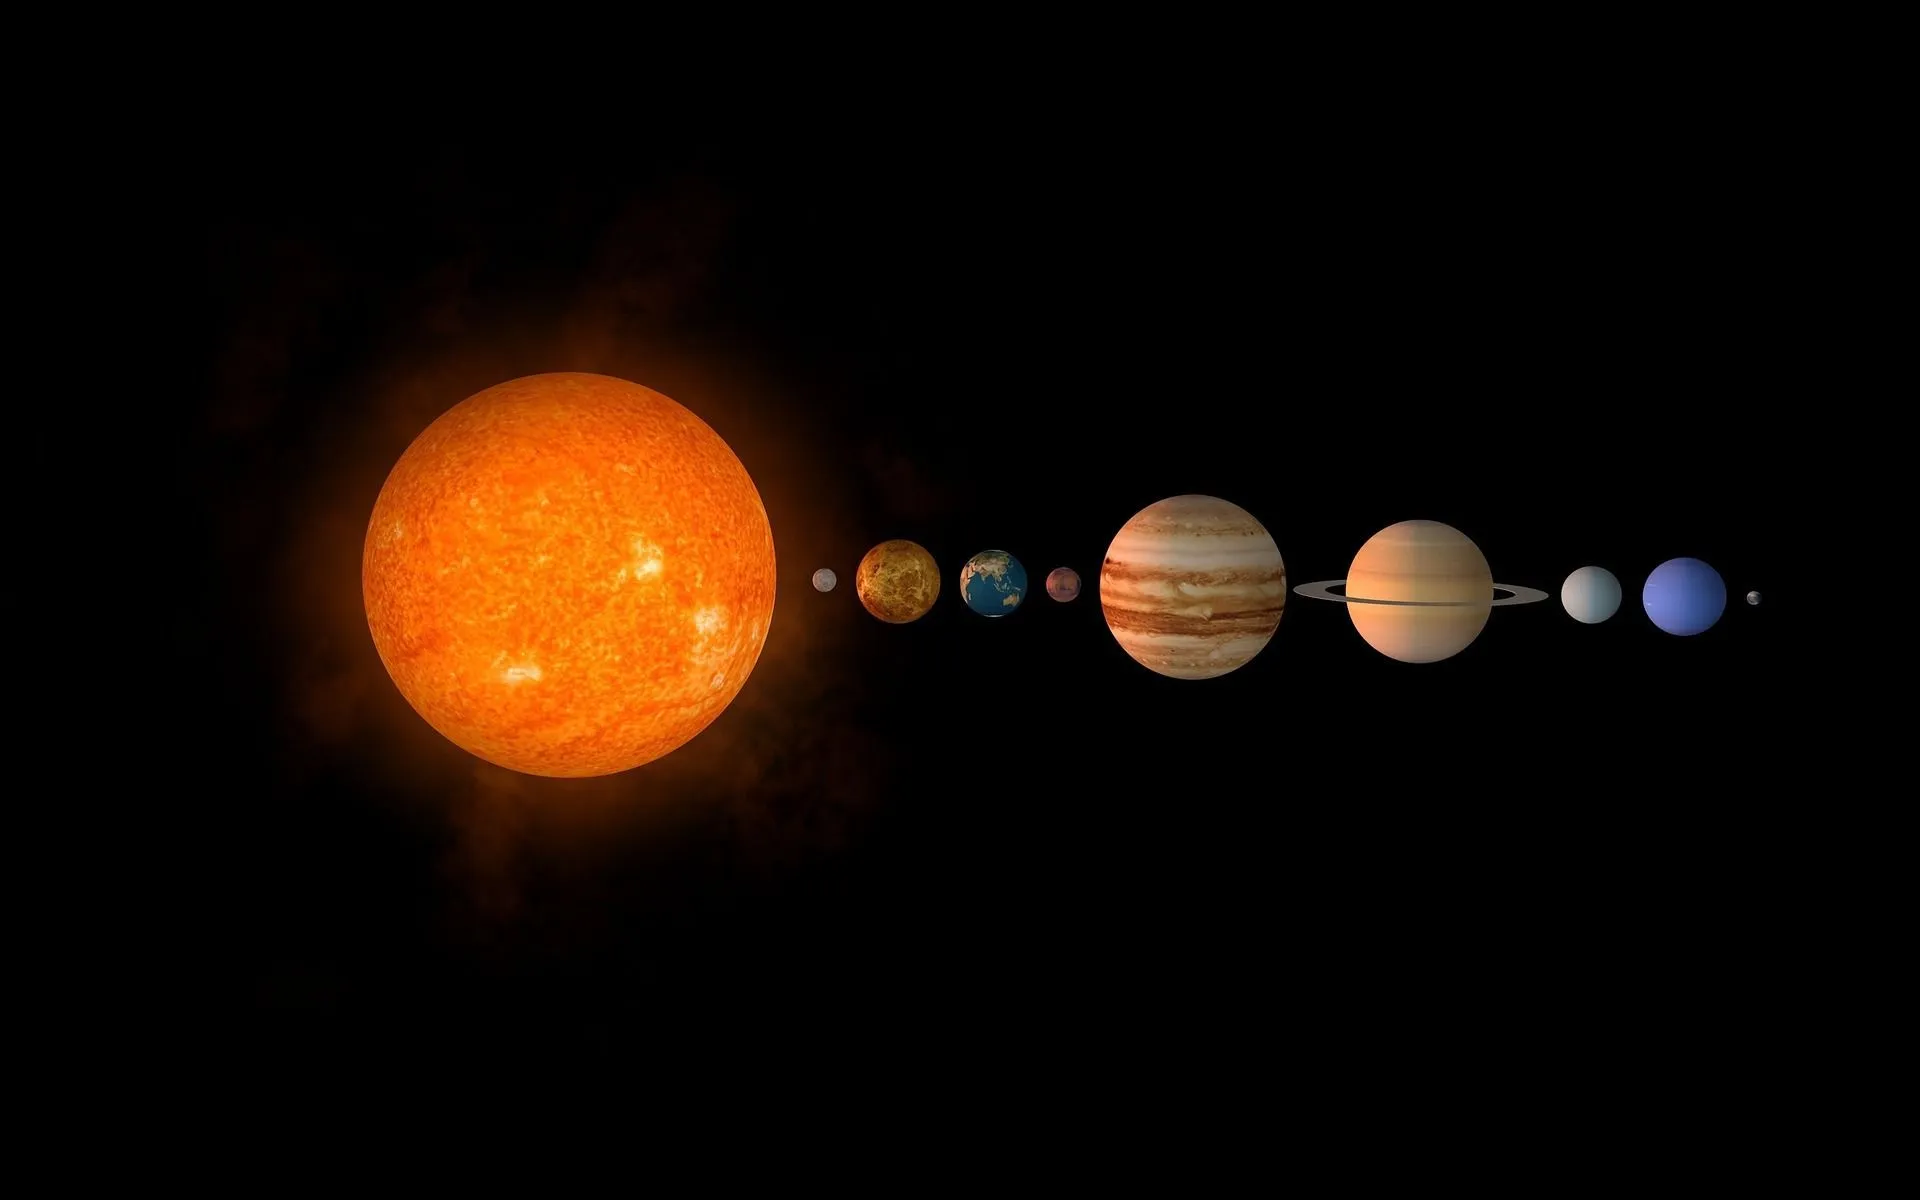 Earth is the third planet that goes around the sun.